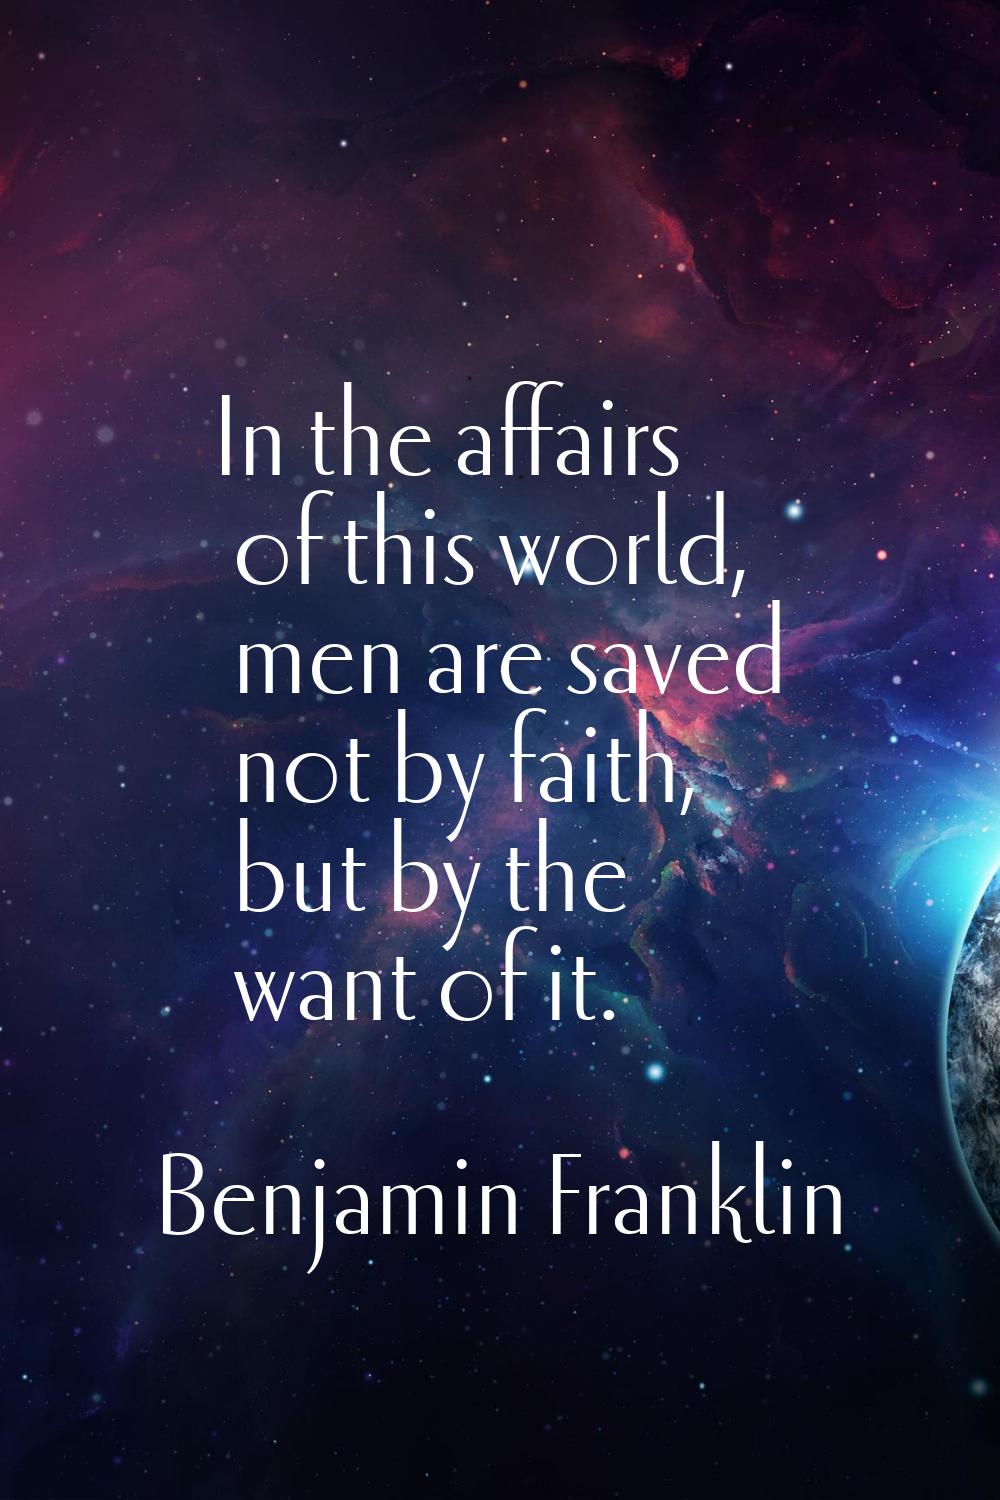 In the affairs of this world, men are saved not by faith, but by the want of it.